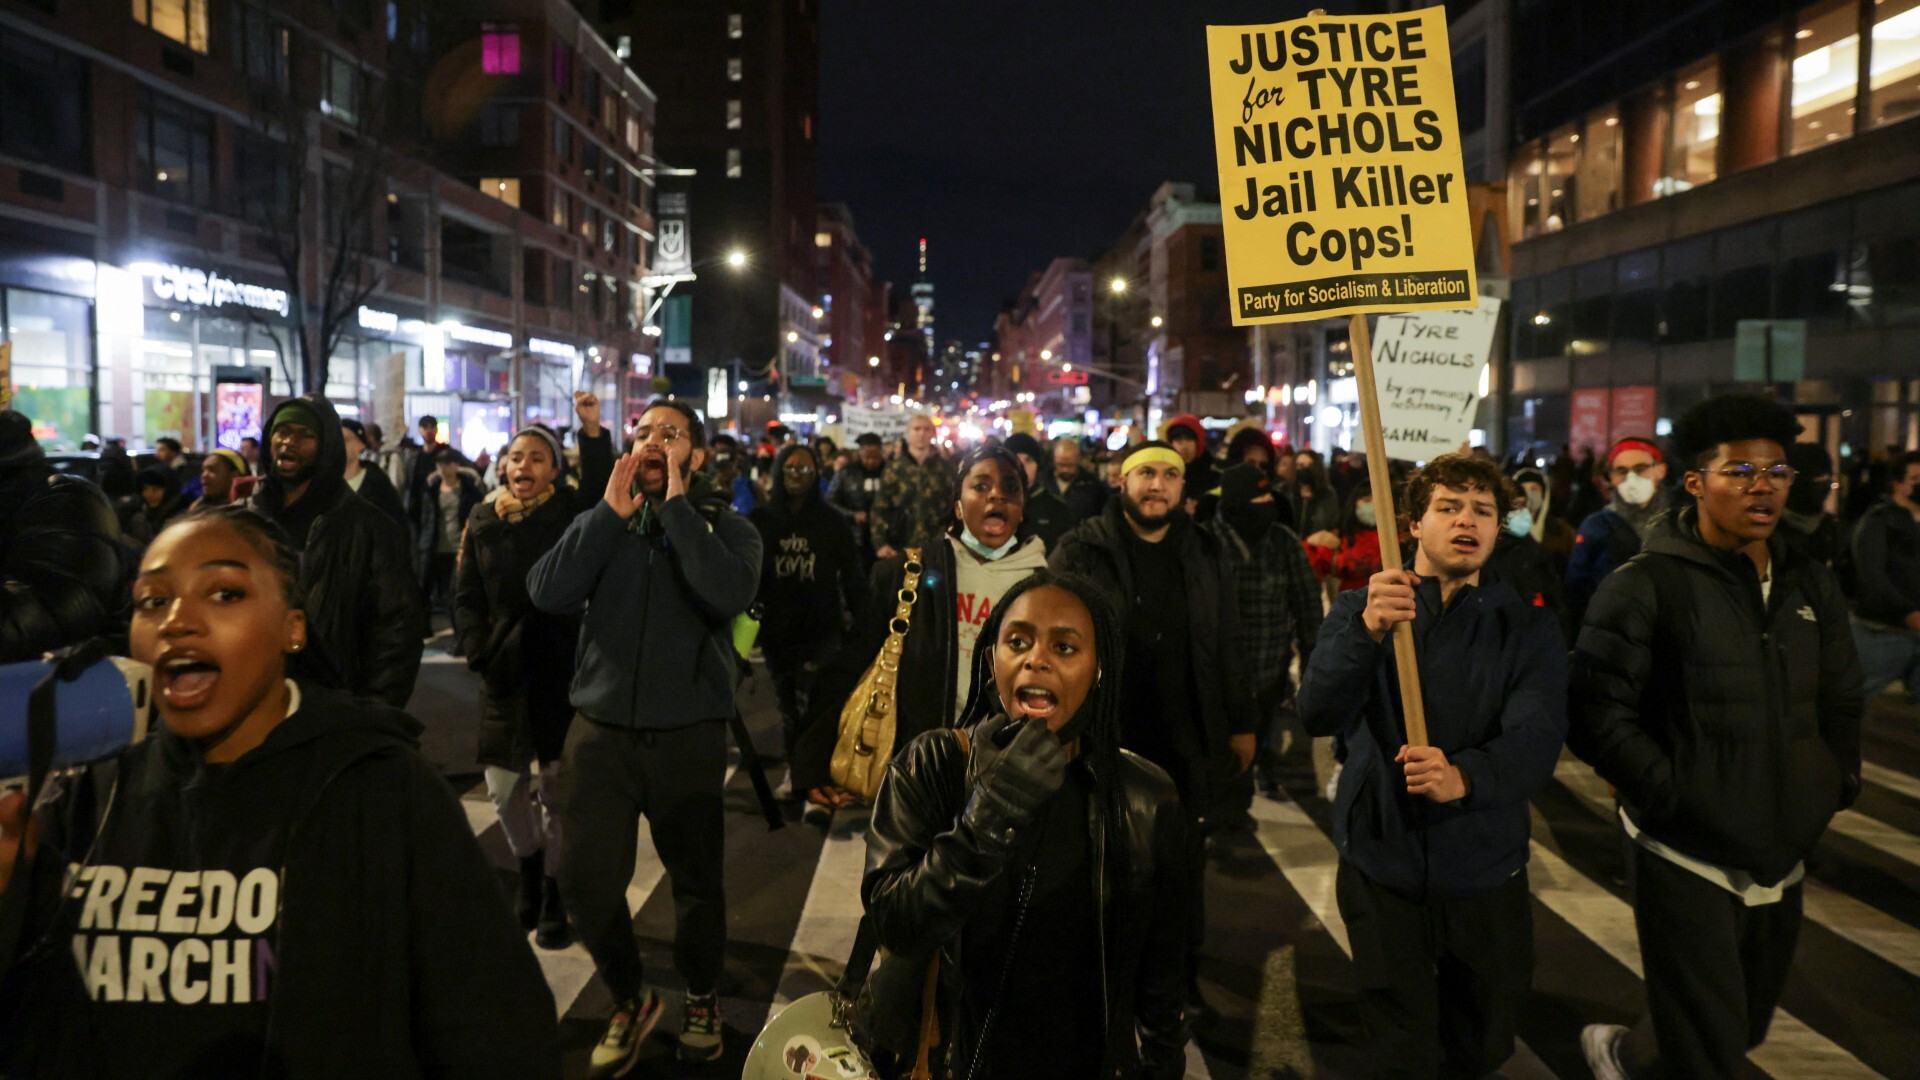 What more can be done to reduce police violence in the US?